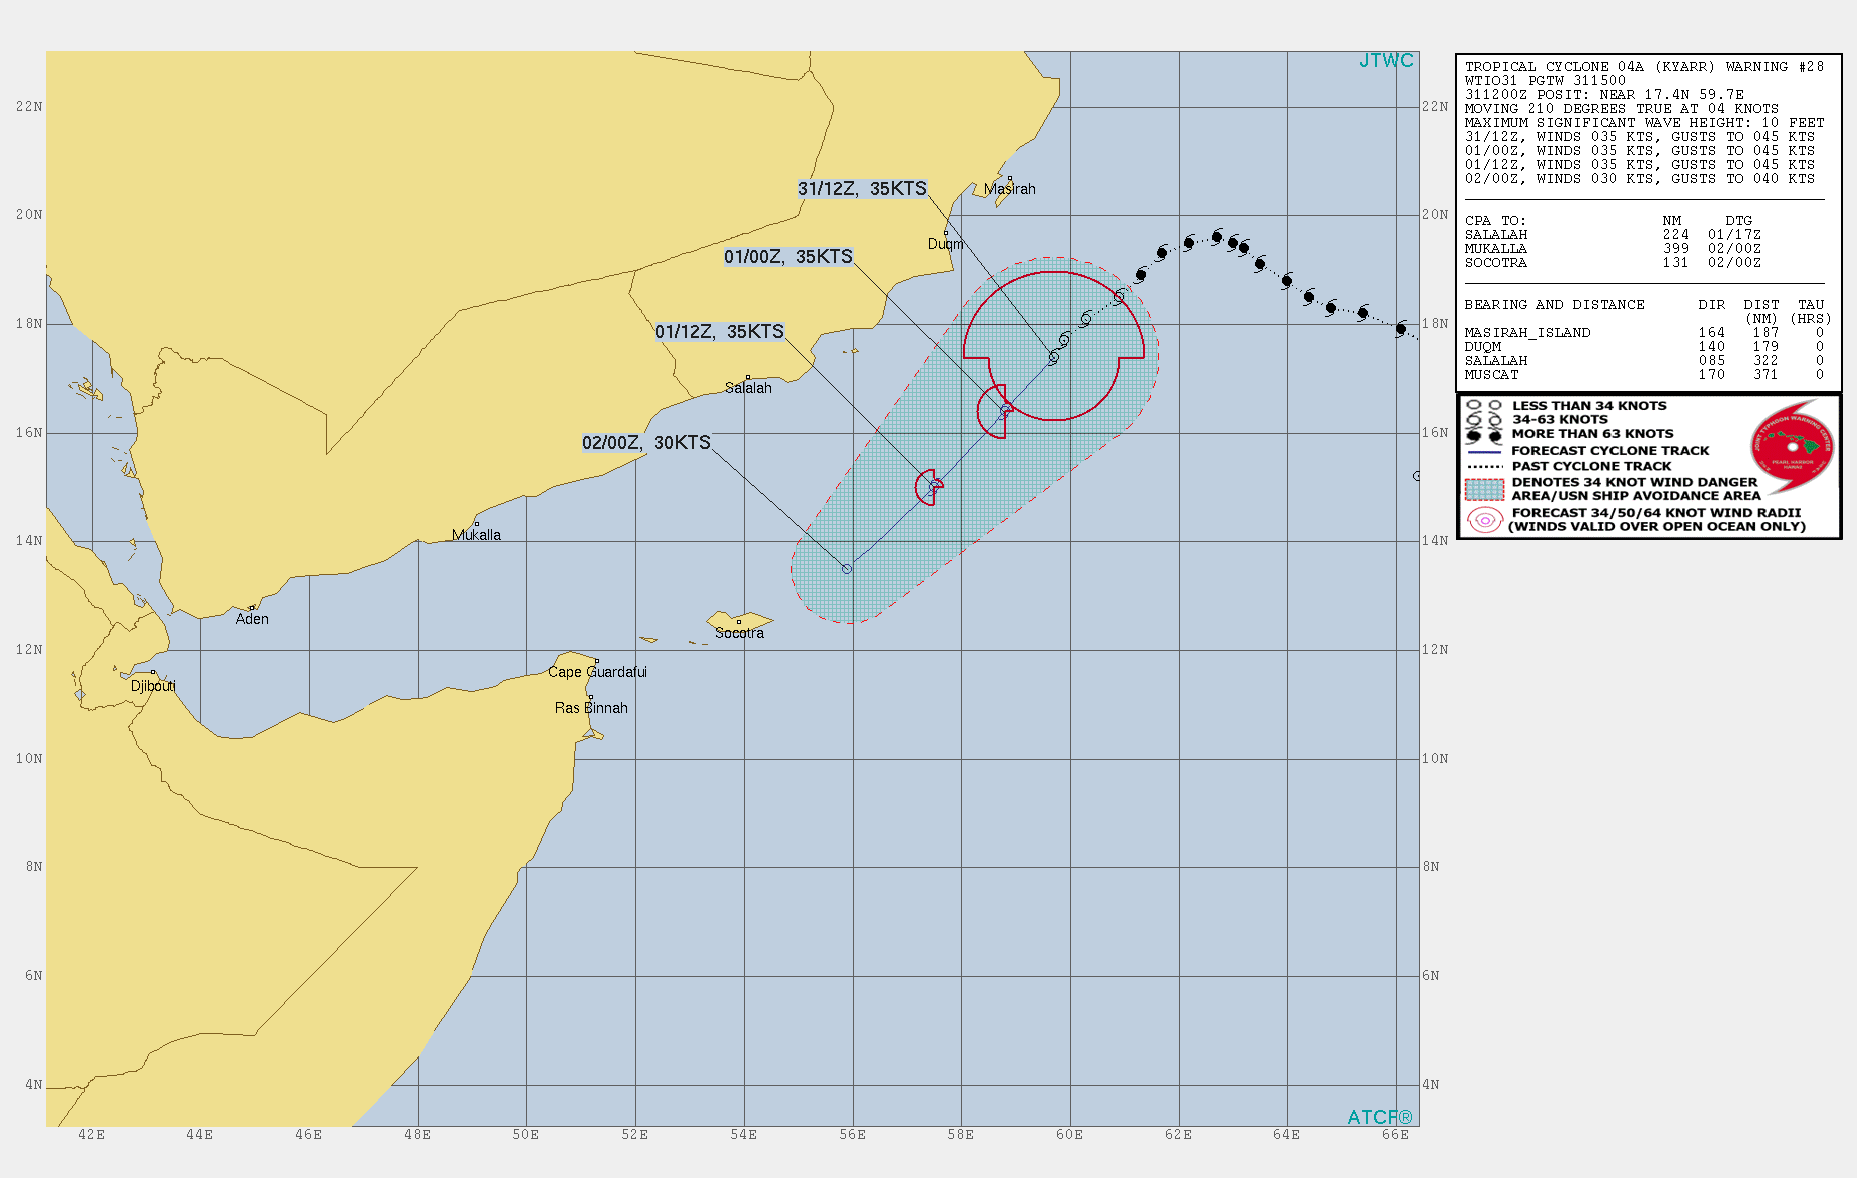 TC 04A: WEAKENING. INTENSITY IS FORECAST TO FALL BELOW 35KTS AFTER 24H